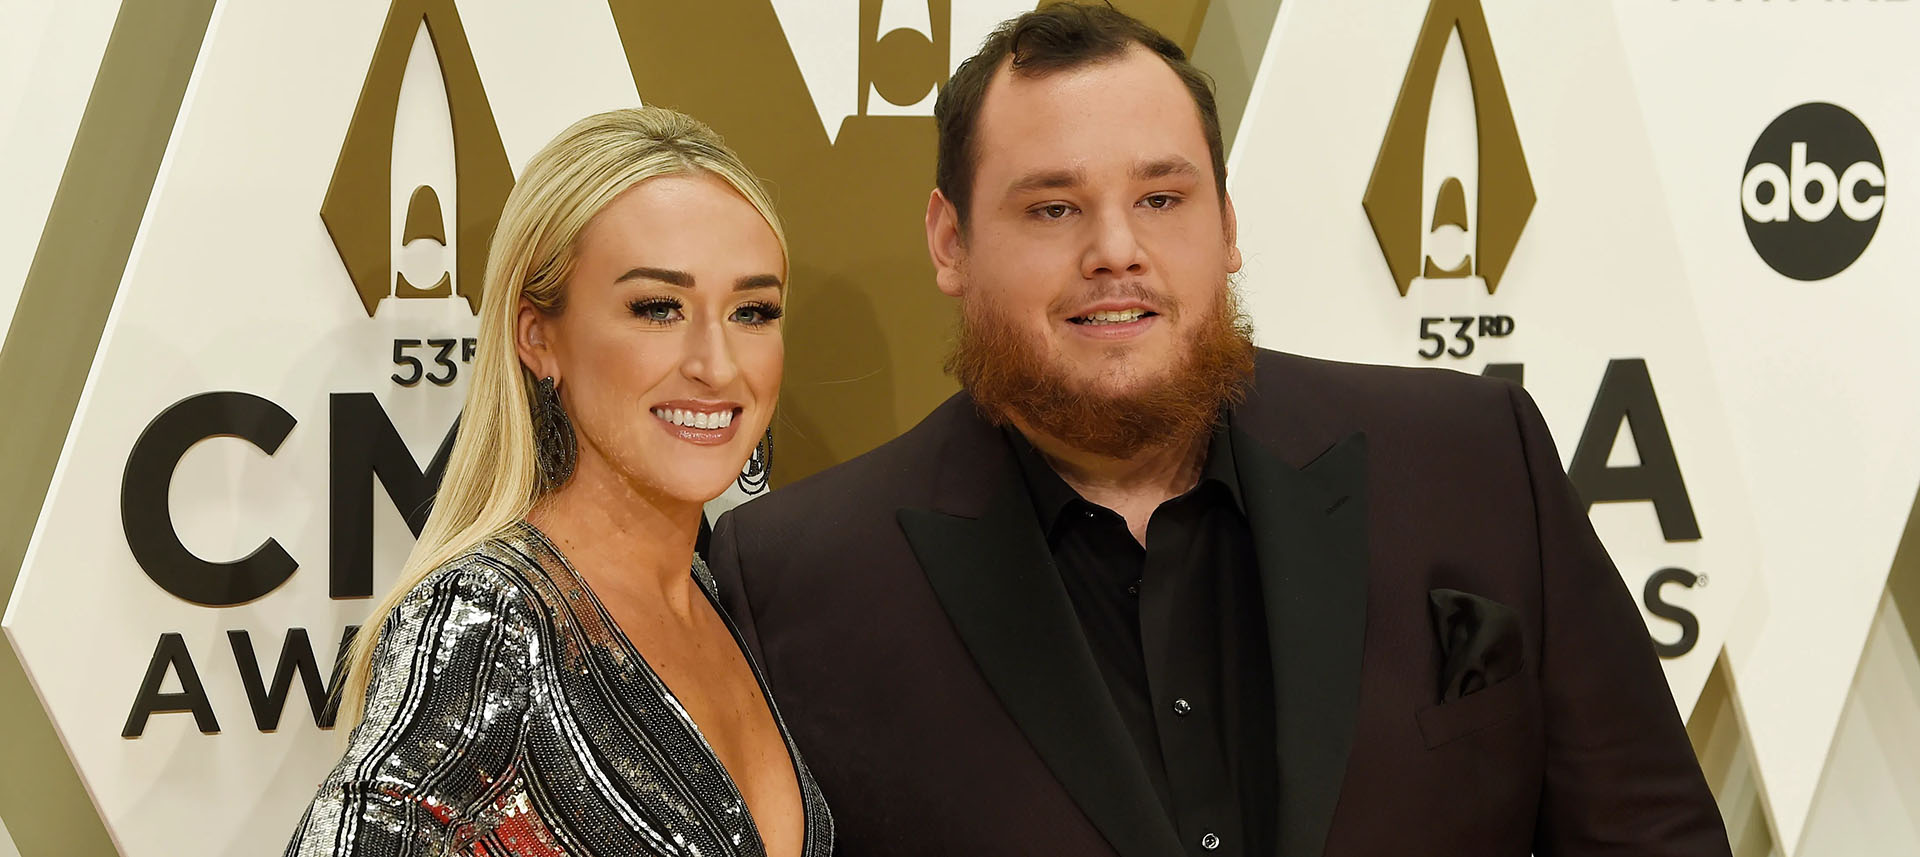 Luke Combs and wife posing at the CMT Awards